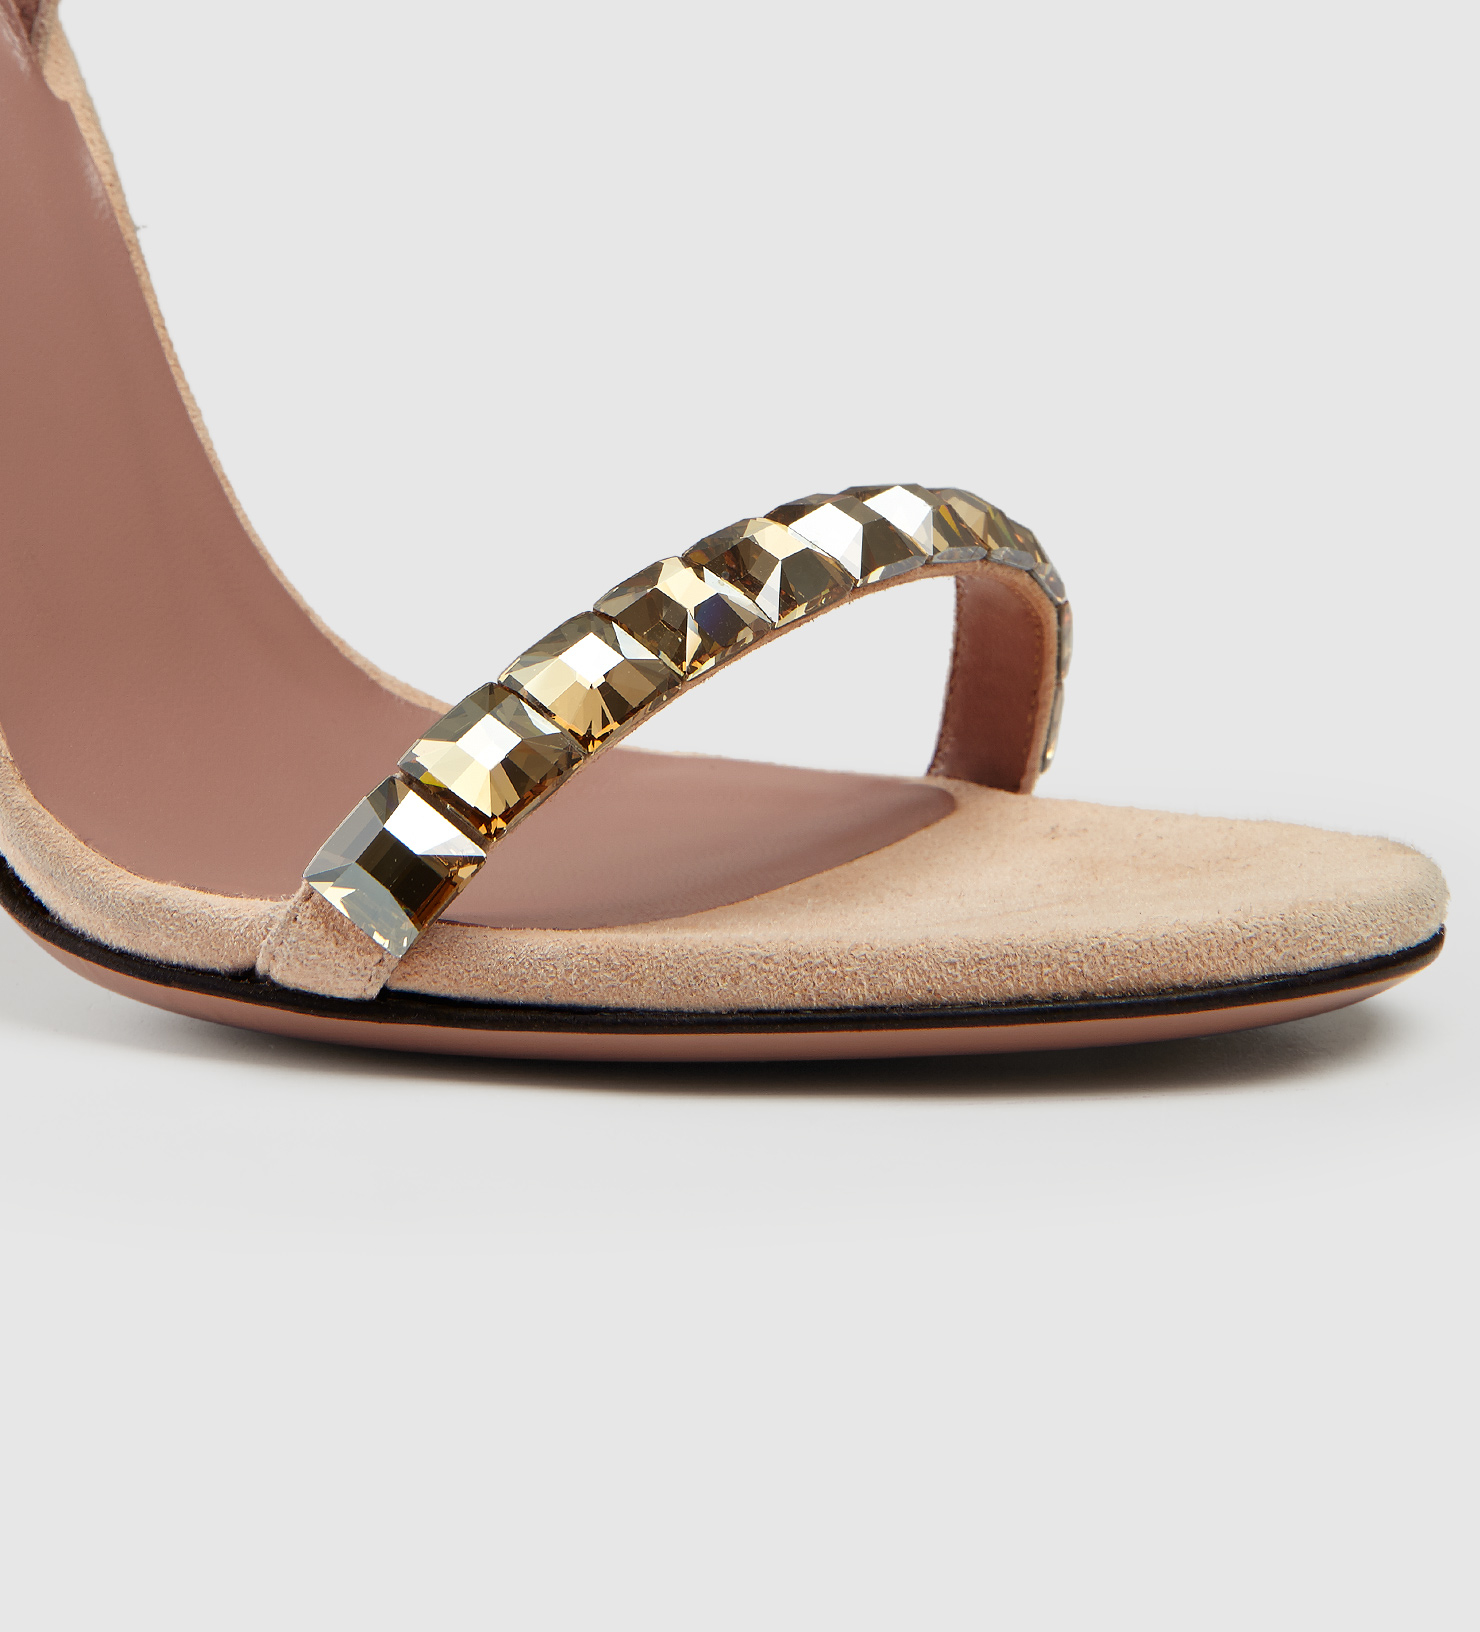 Lyst - Gucci Mallory Crystal Embellished Suede Sandals in Brown